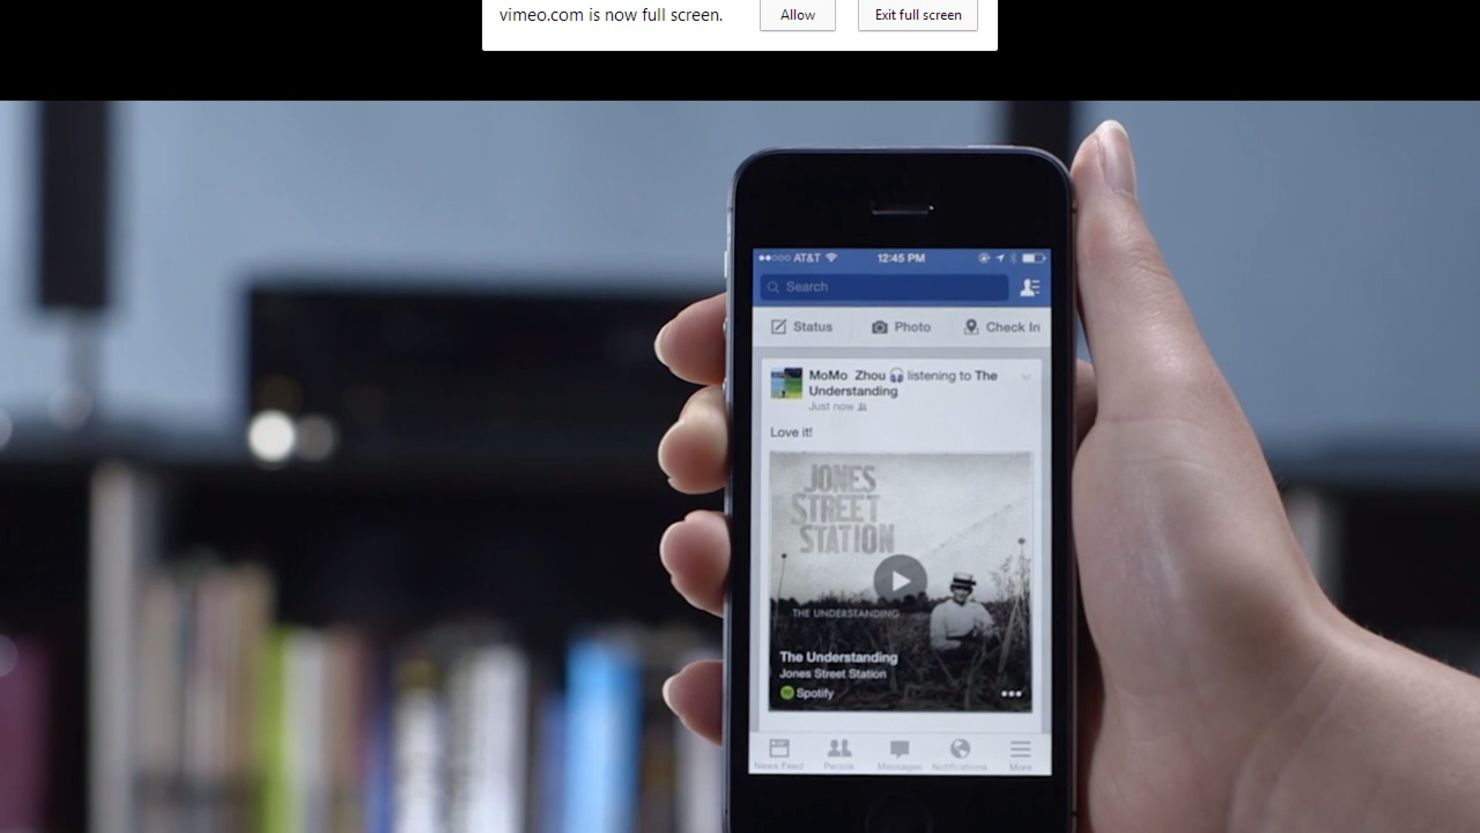 Facebook has added an audio-recognition feature that makes it easier to share updates about music and TV shows.